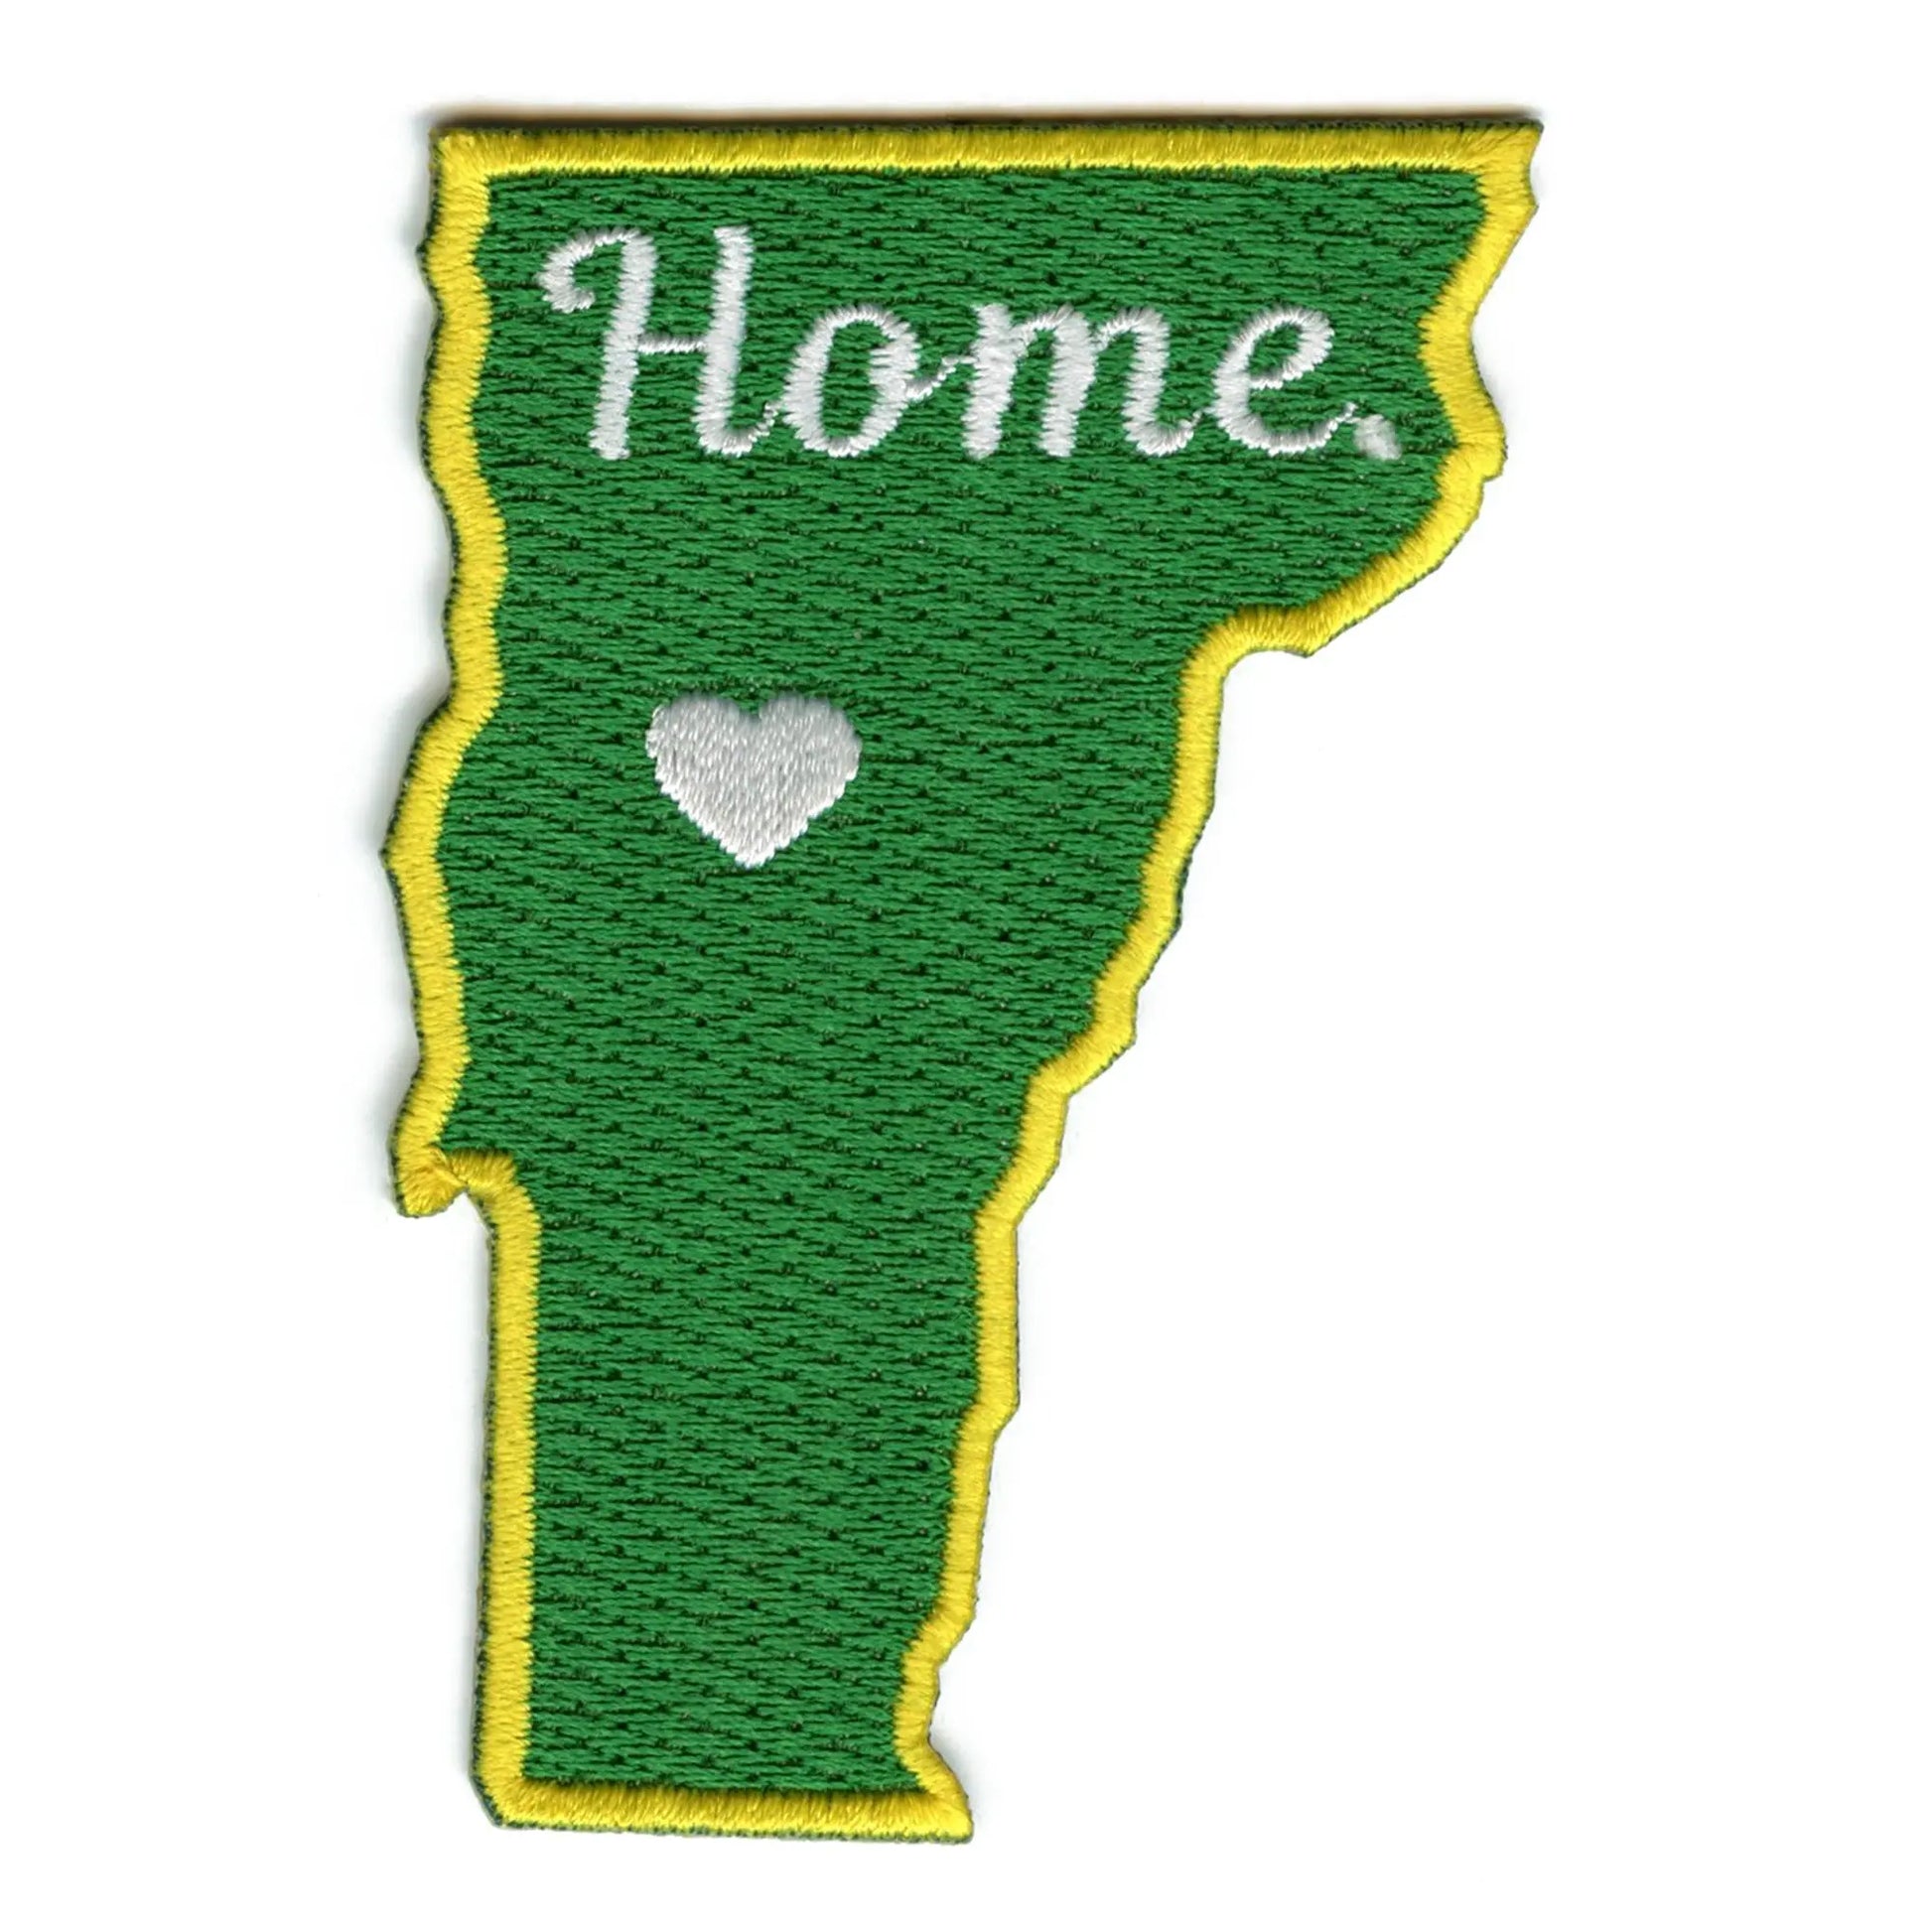 Vermont Home State Patch Embroidered Iron On 